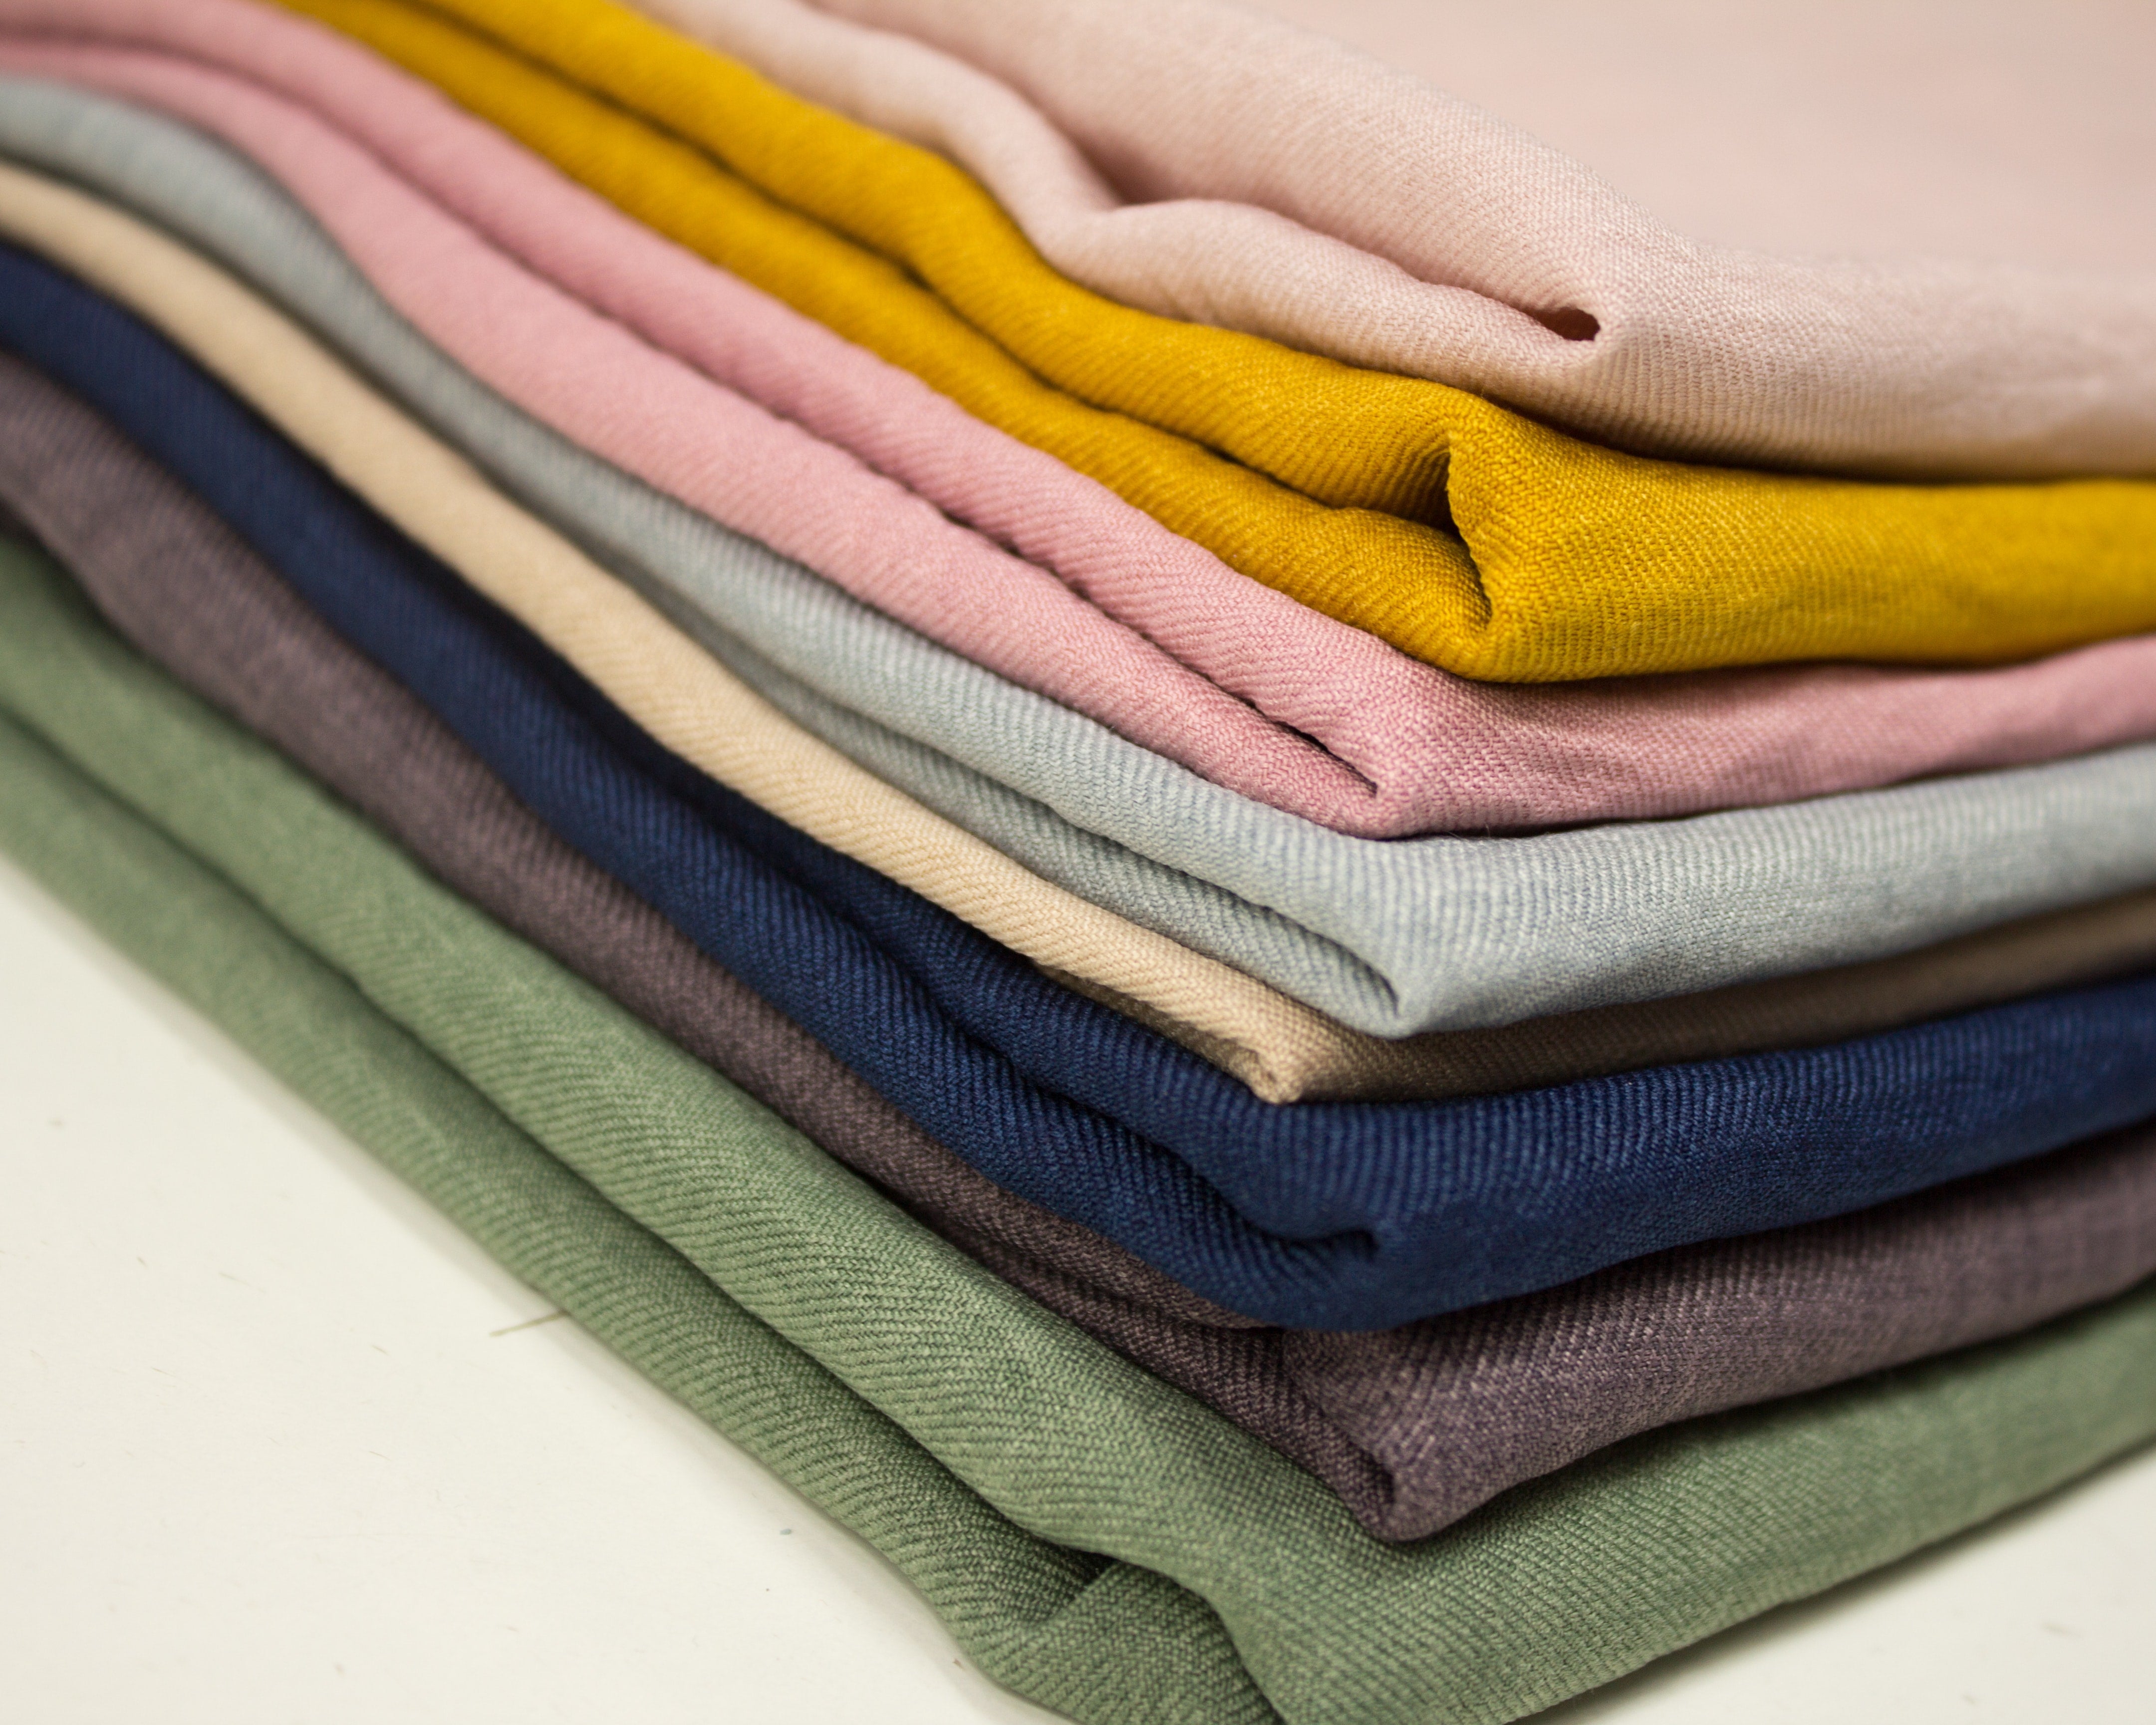 What is Tencel, and is Tencel a sustainable fabric? - Ethical Made